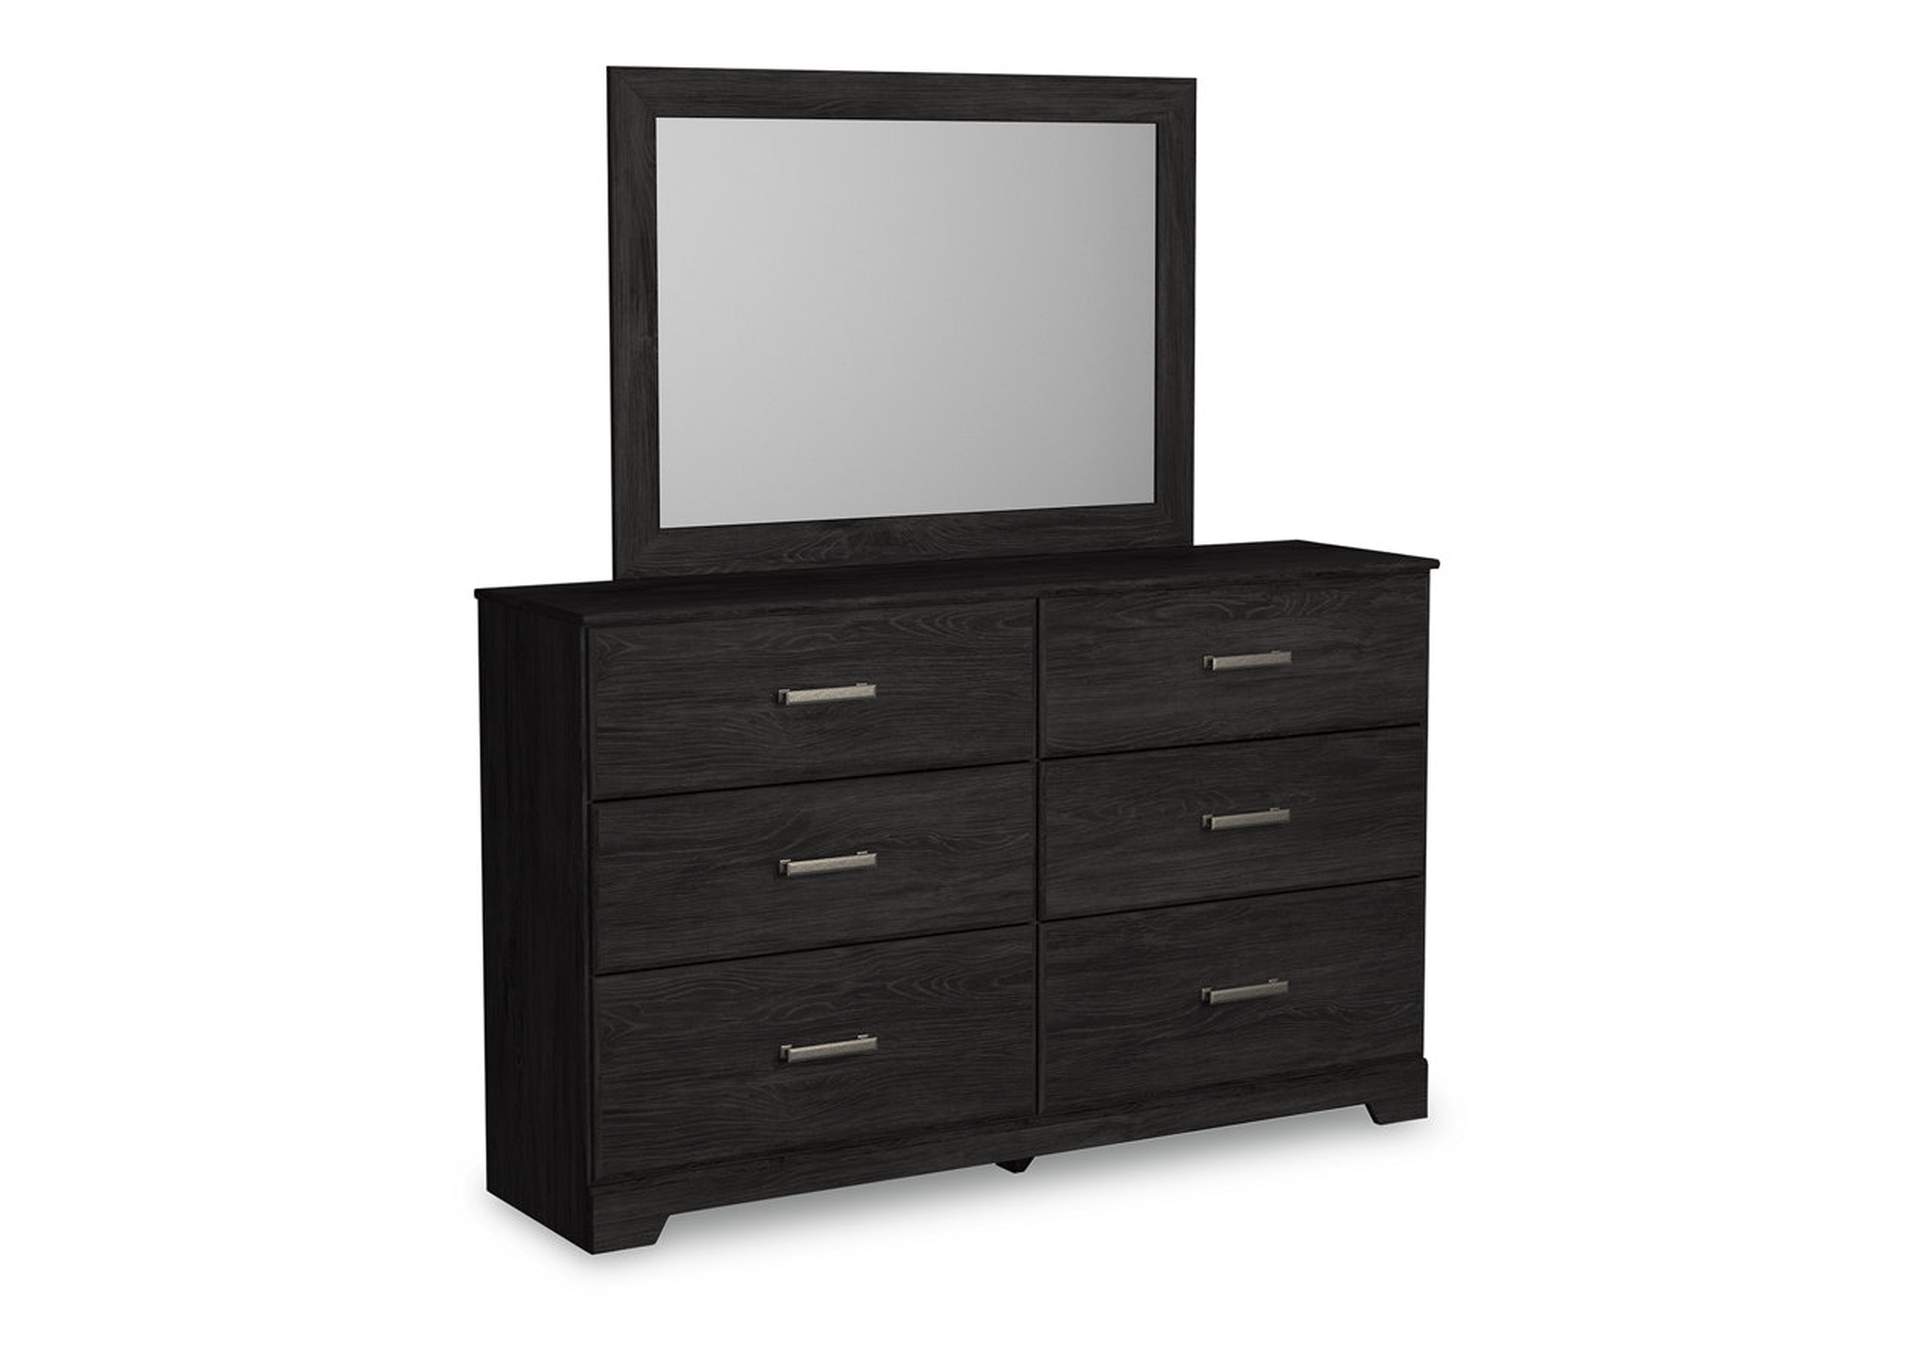 Belachime Full Panel Bed, Dresser and Mirror,Signature Design By Ashley